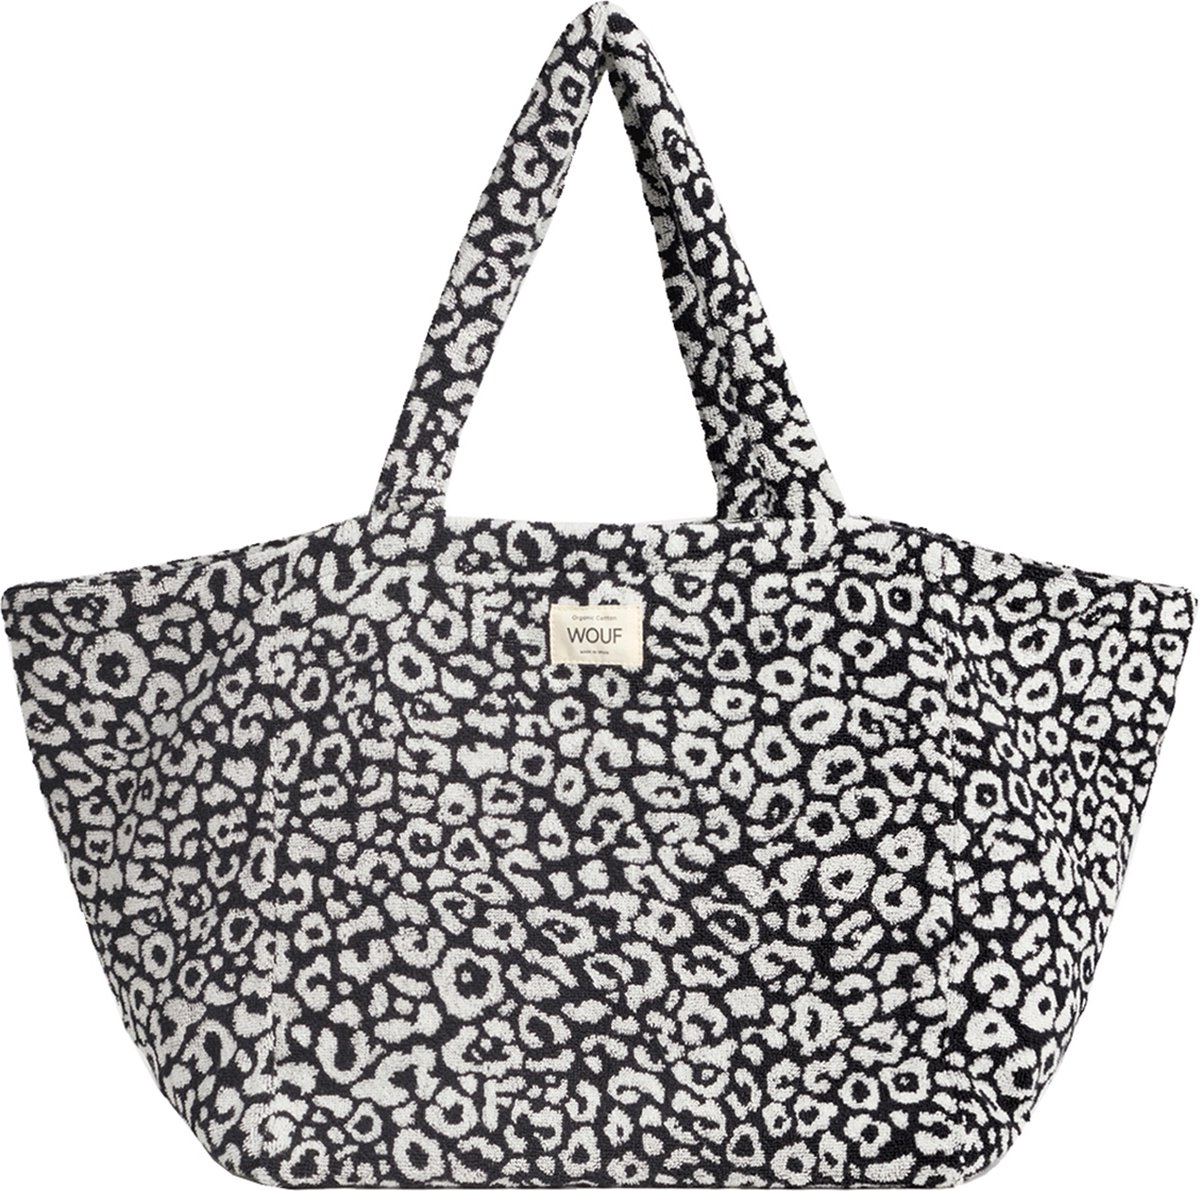 Wouf Coco Large Tote Bag multi